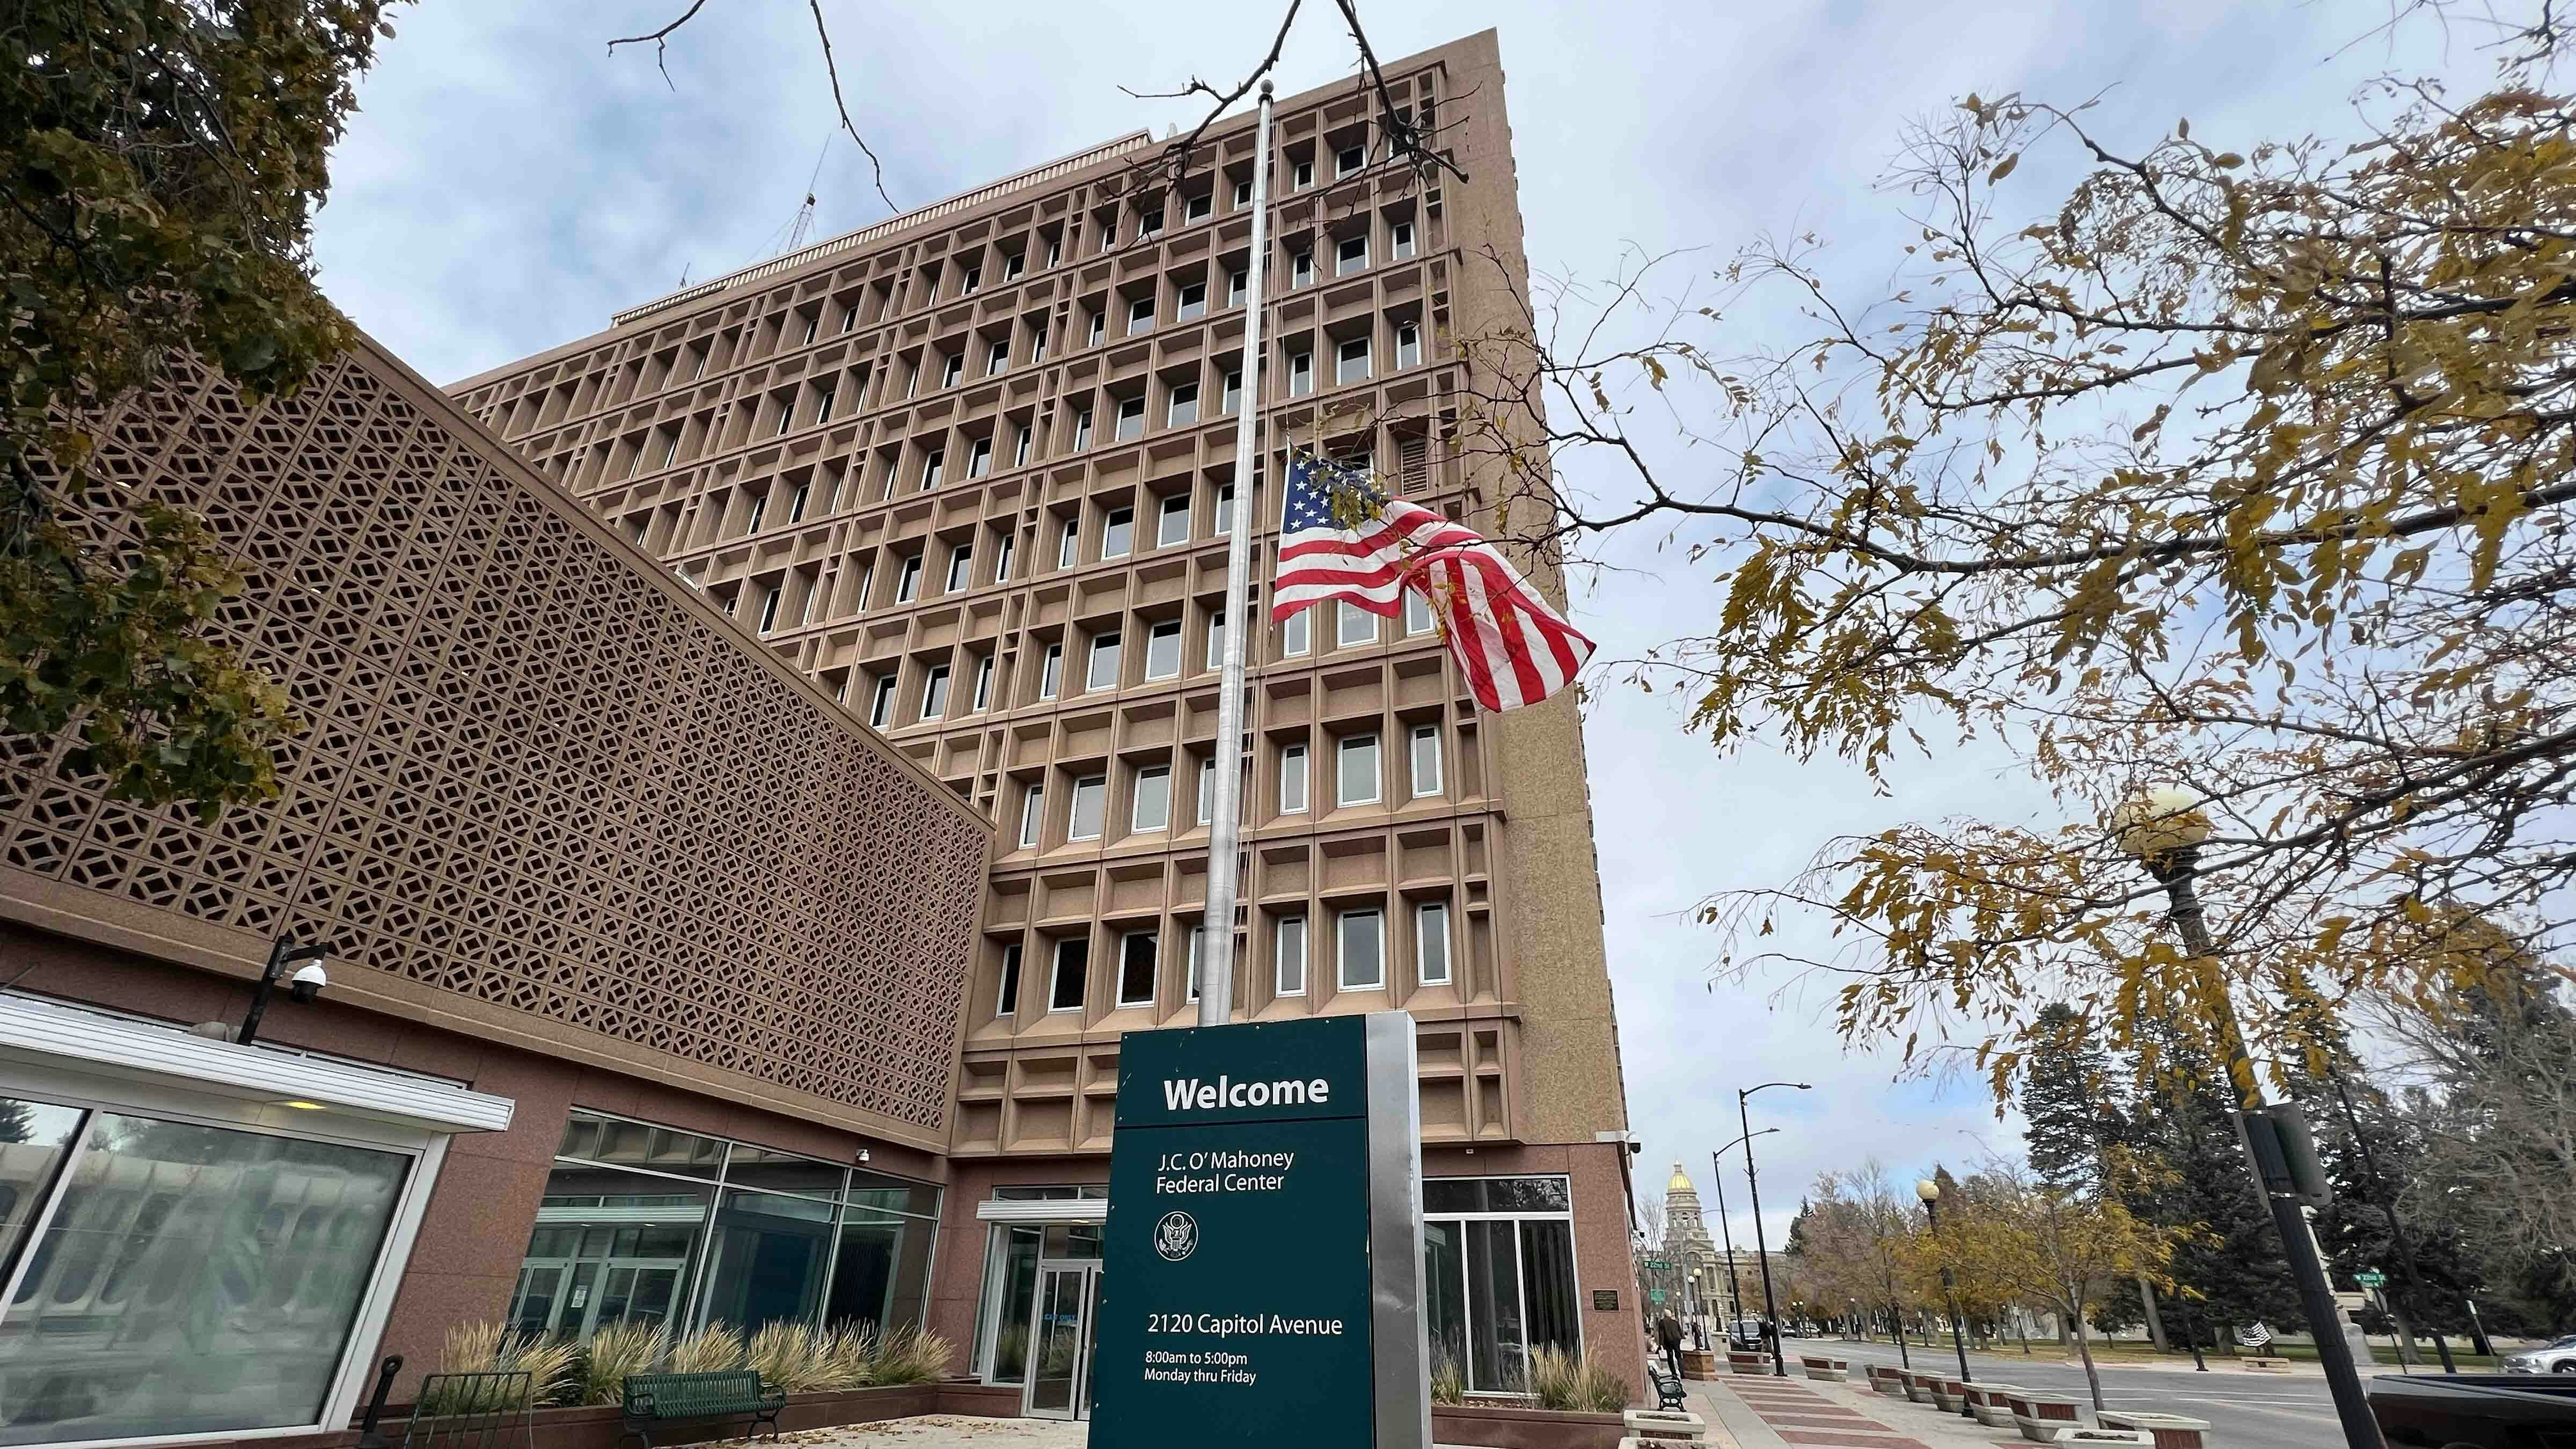 The J.C. O'Mahoney Federal Courthouse in Cheyenne on Oct 27, 2023.